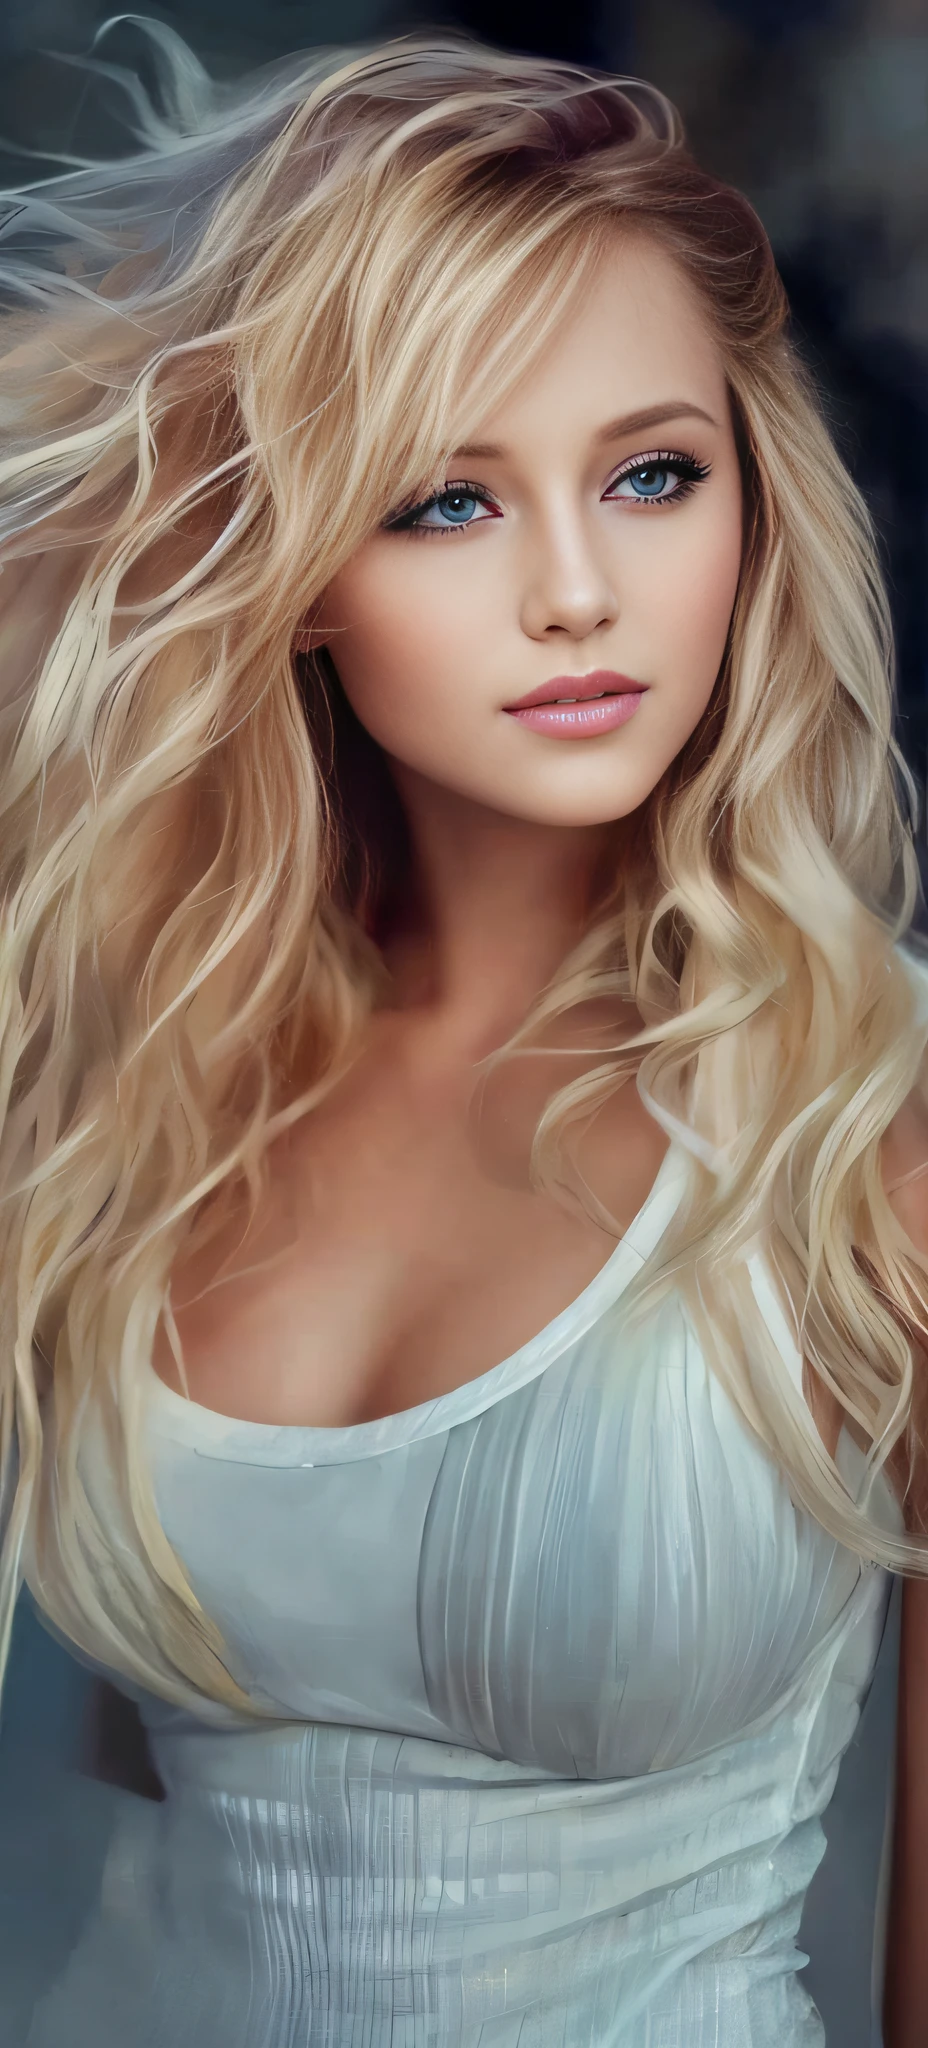 blonde woman with blue eyes and long hair posing for a picture, beautiful blonde woman, beautiful blonde girl, blonde woman, beautiful blonde hair, a girl with blonde hair, blonde girl, flowing blonde hair, sultry digital painting, blonde goddess, blonde flowing hair, blonde and attractive features, a gorgeous blonde, gorgeous digital painting, realistic digital painting, airbrush digital oil painting